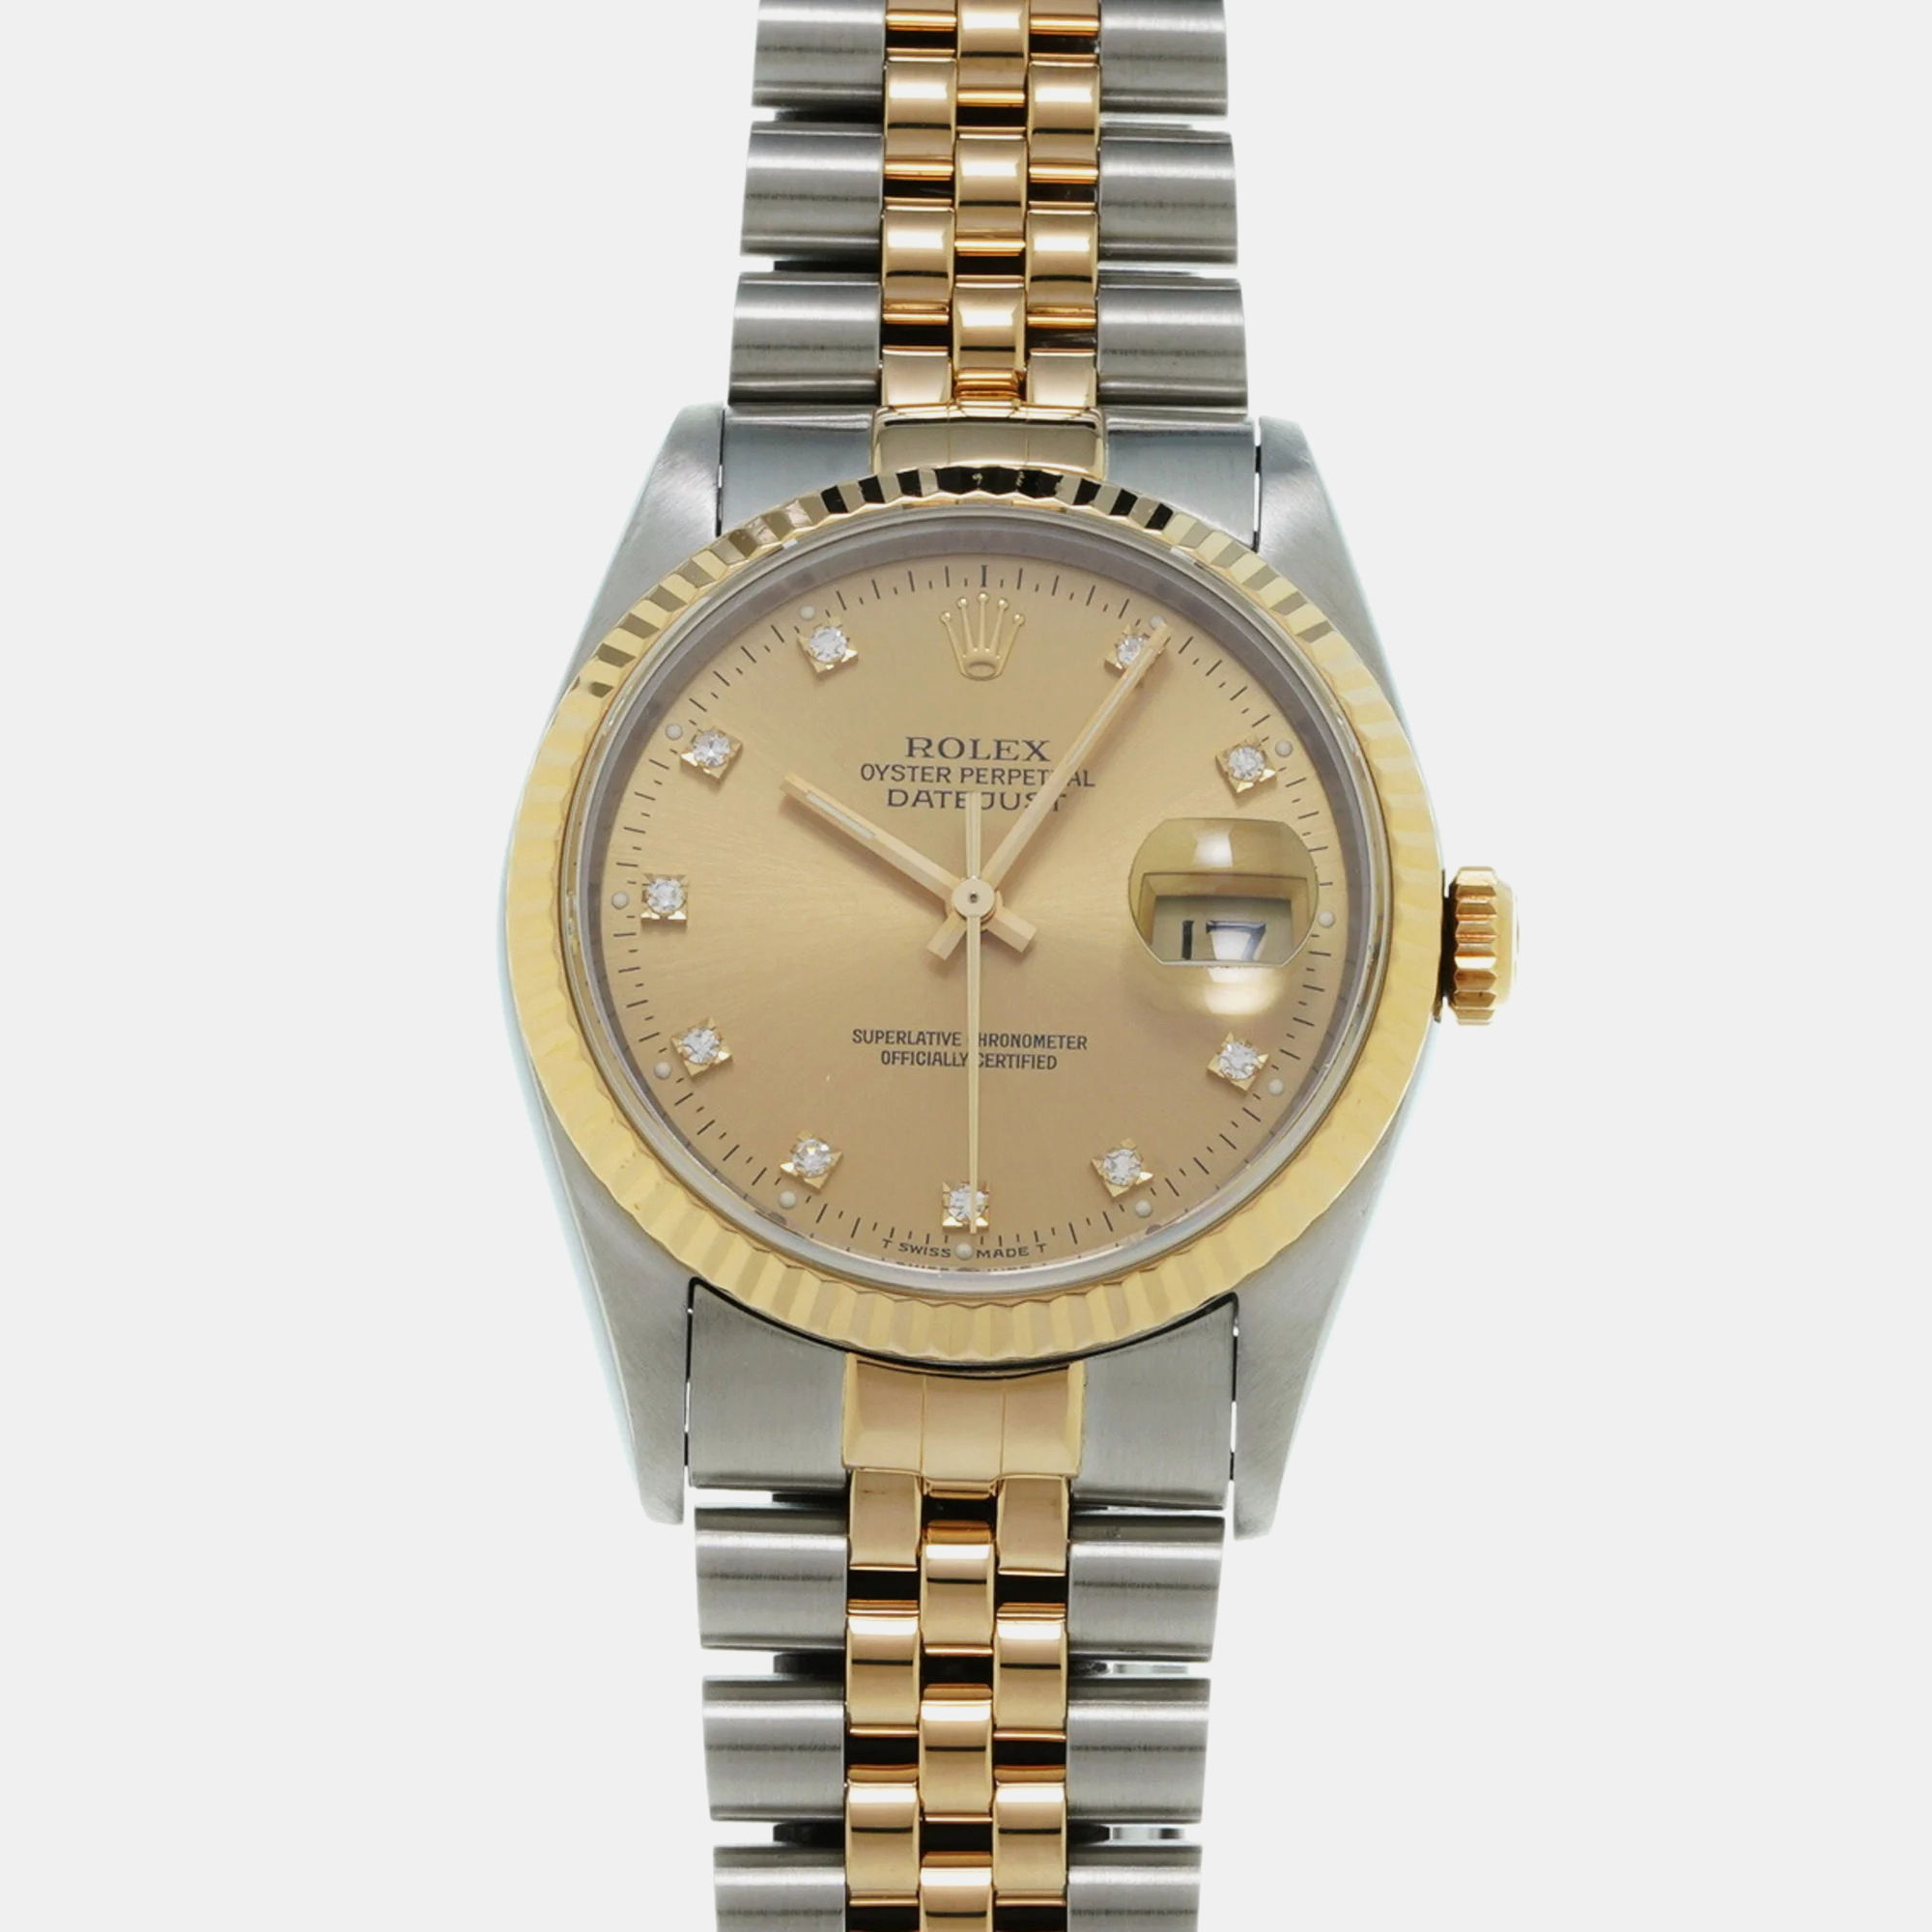 Rolex champagne diamond 18k yellow gold stainless steel datejust 16233 automatic men's wristwatch 36 mm